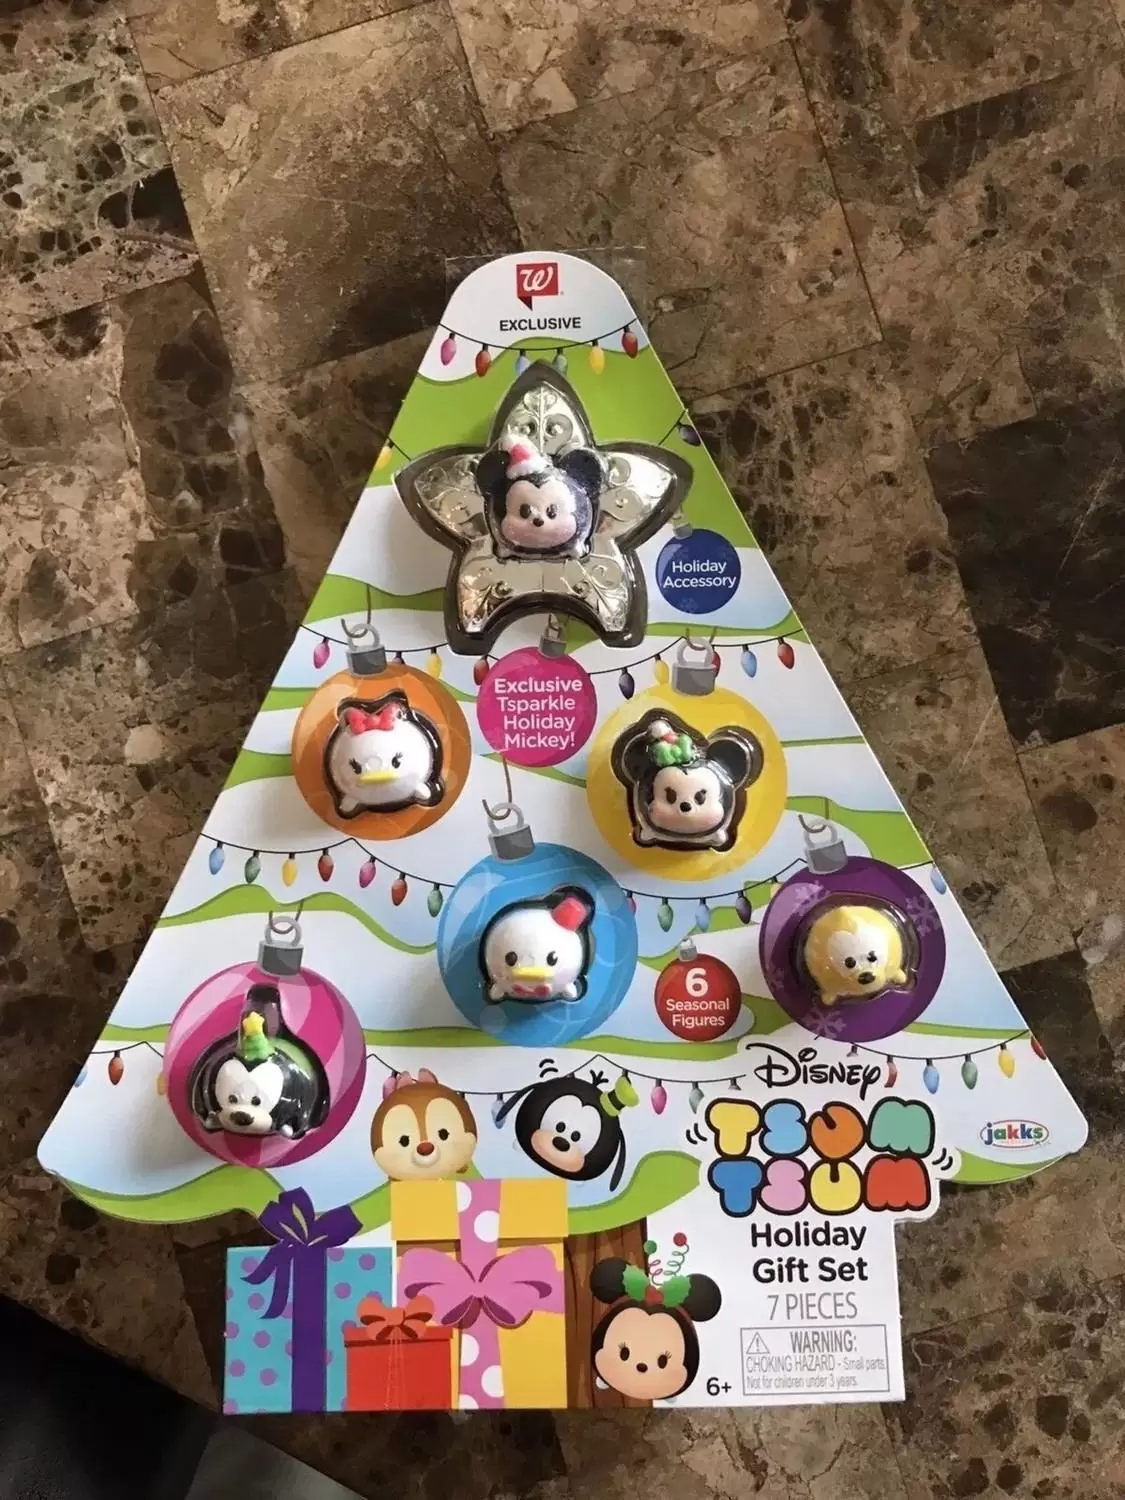 Tsum Tsum Jakks Pacific Exclusive And Sets - Holiday Gift Set 7 Pieces